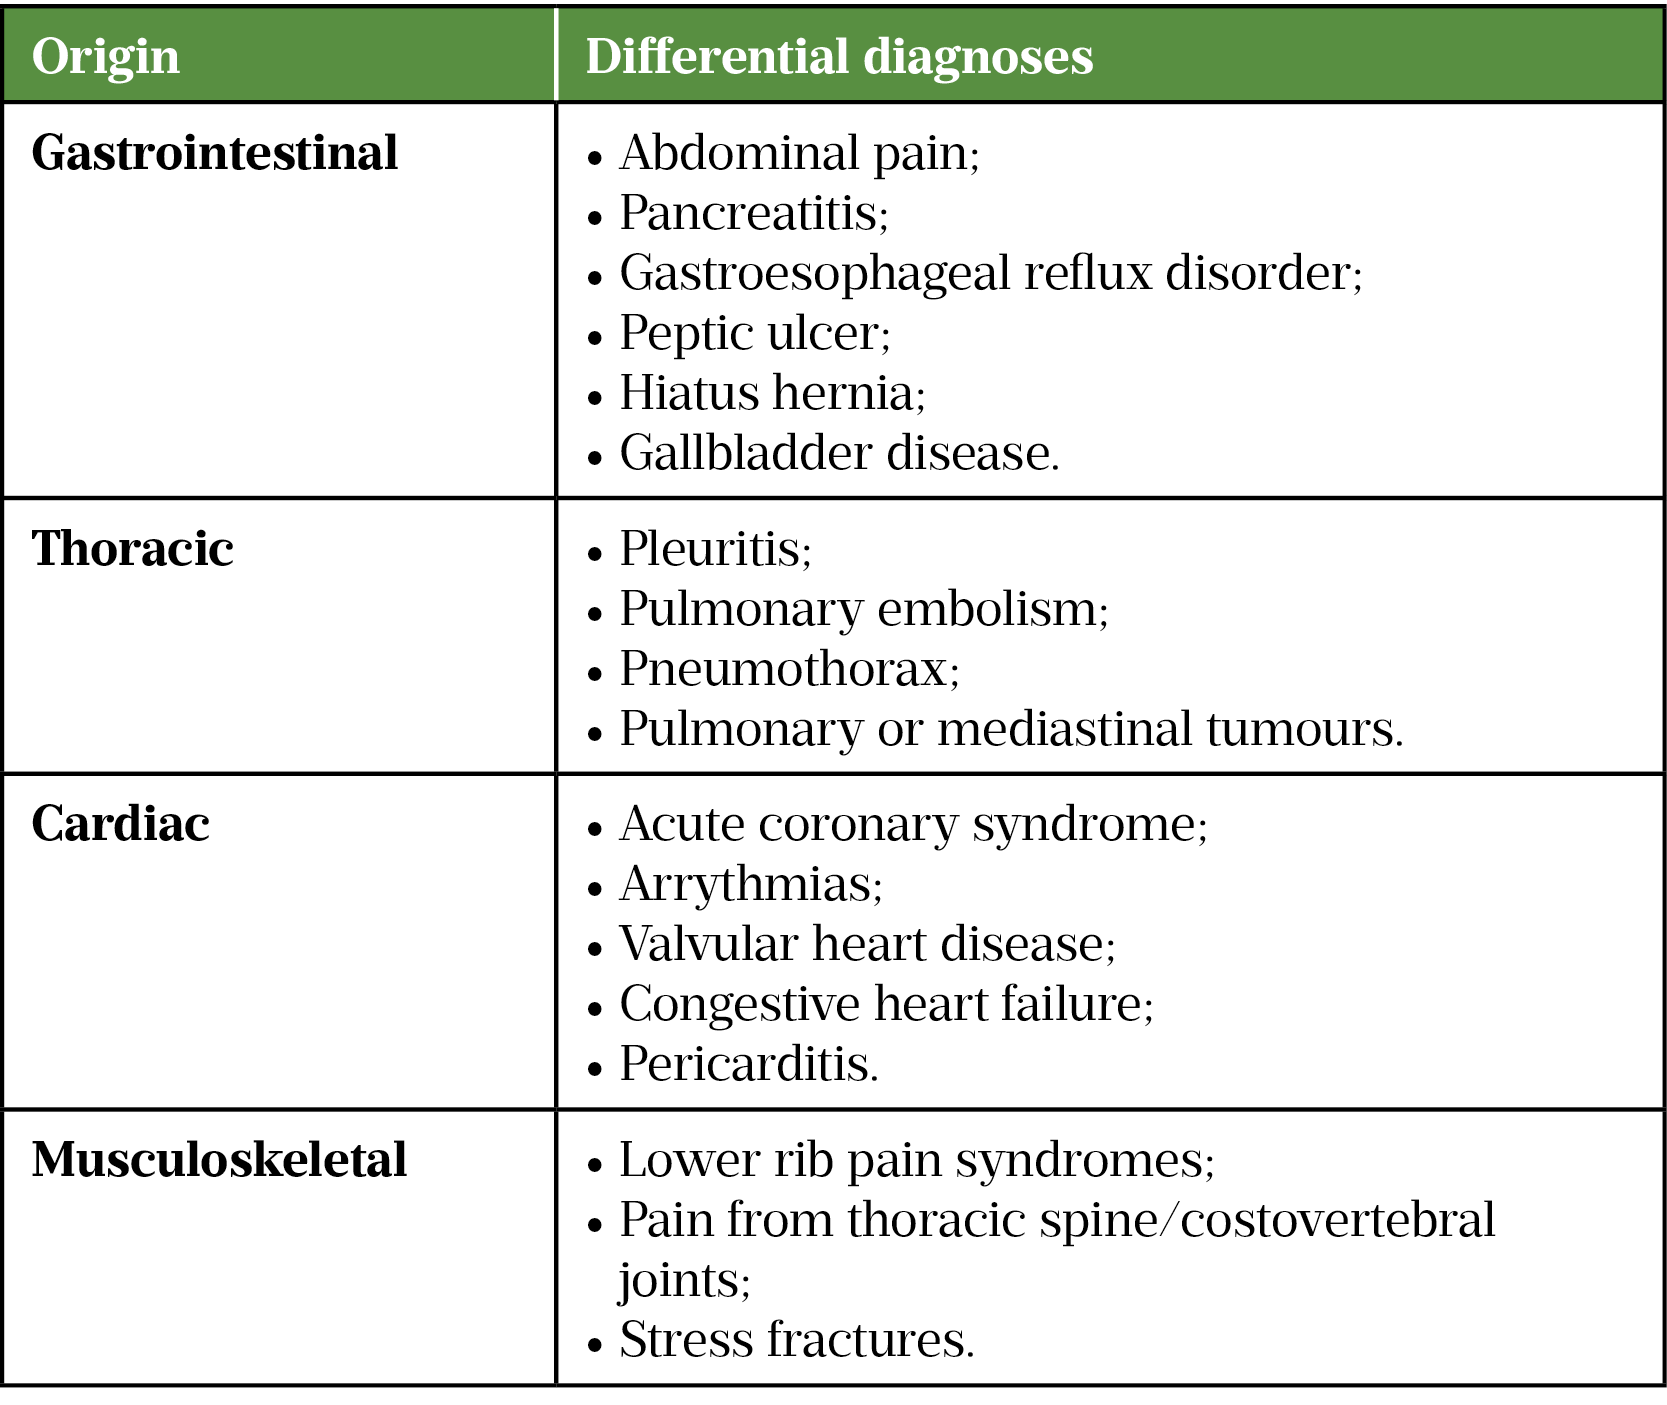 Table 2: Stable angina differential diagnoses